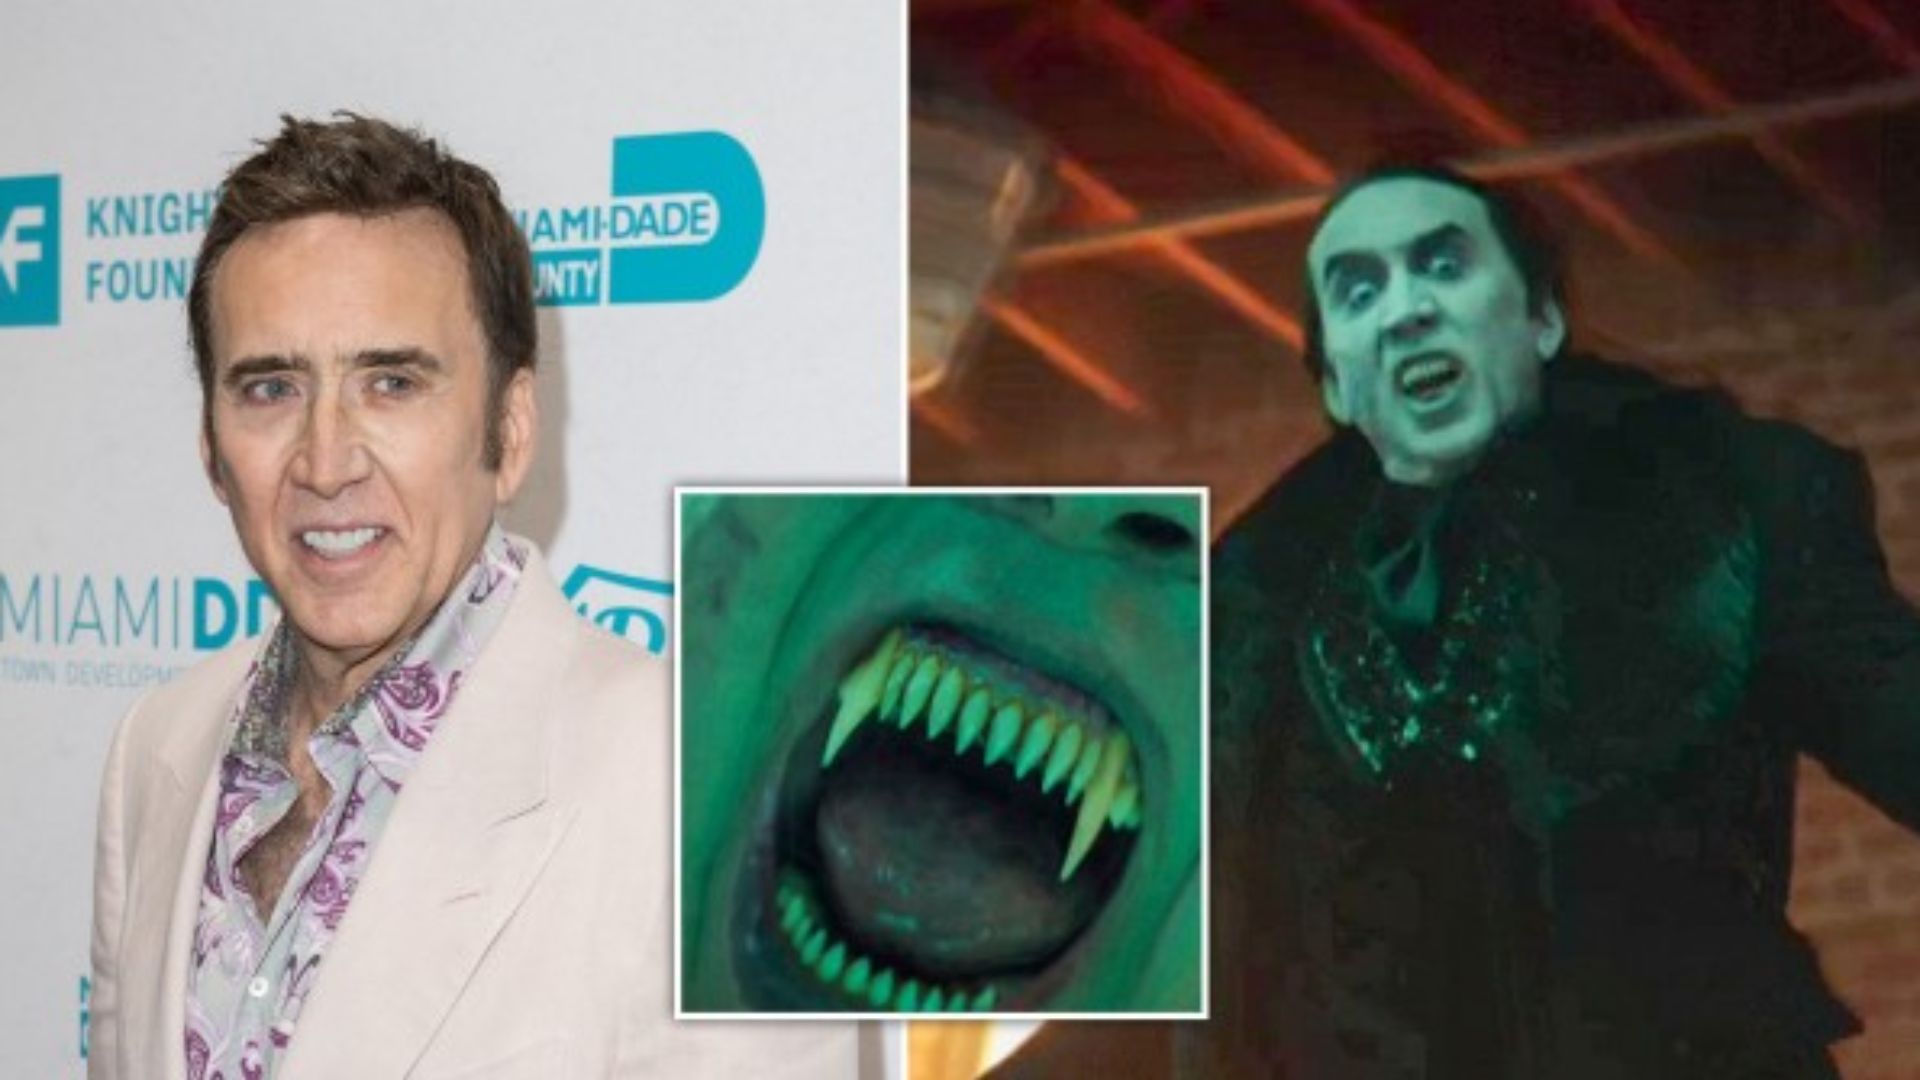 Nicolas Cage is so strategy he wore teeth at home to consummate